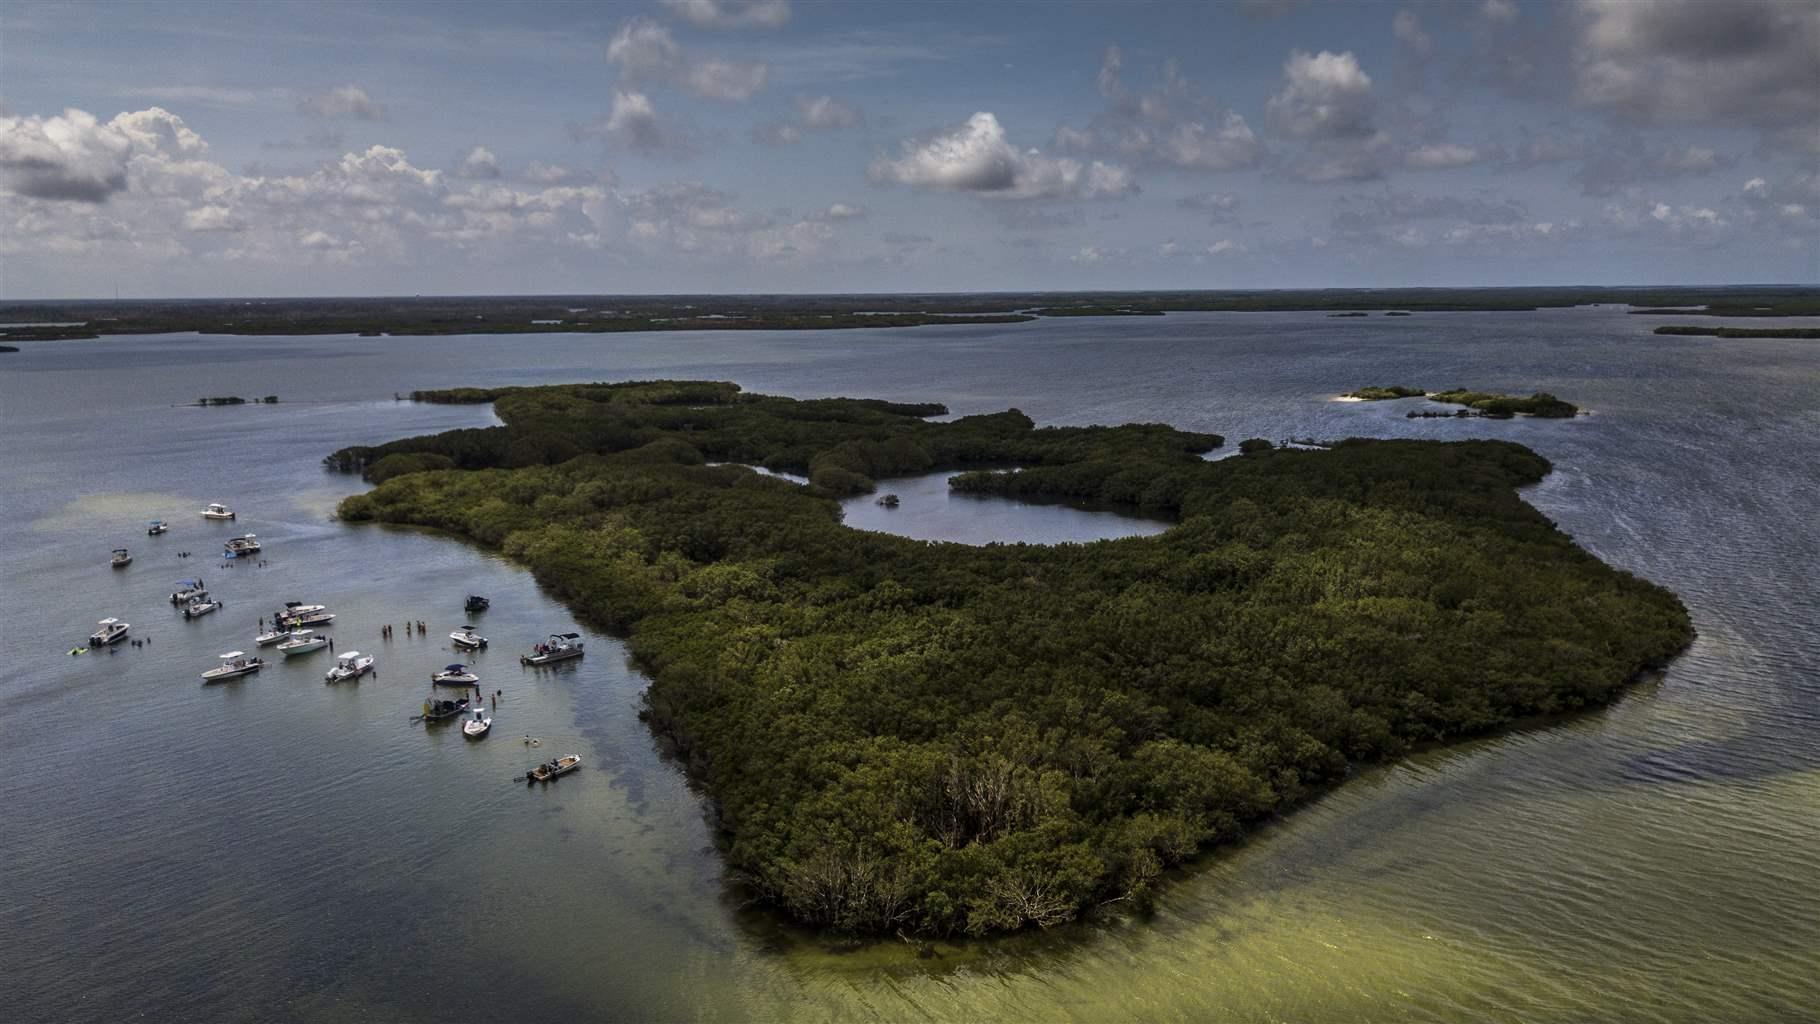 Florida Poised to Protect Gulf of Mexico's Largest Seagrass Bed - The Pew Charitable Trusts